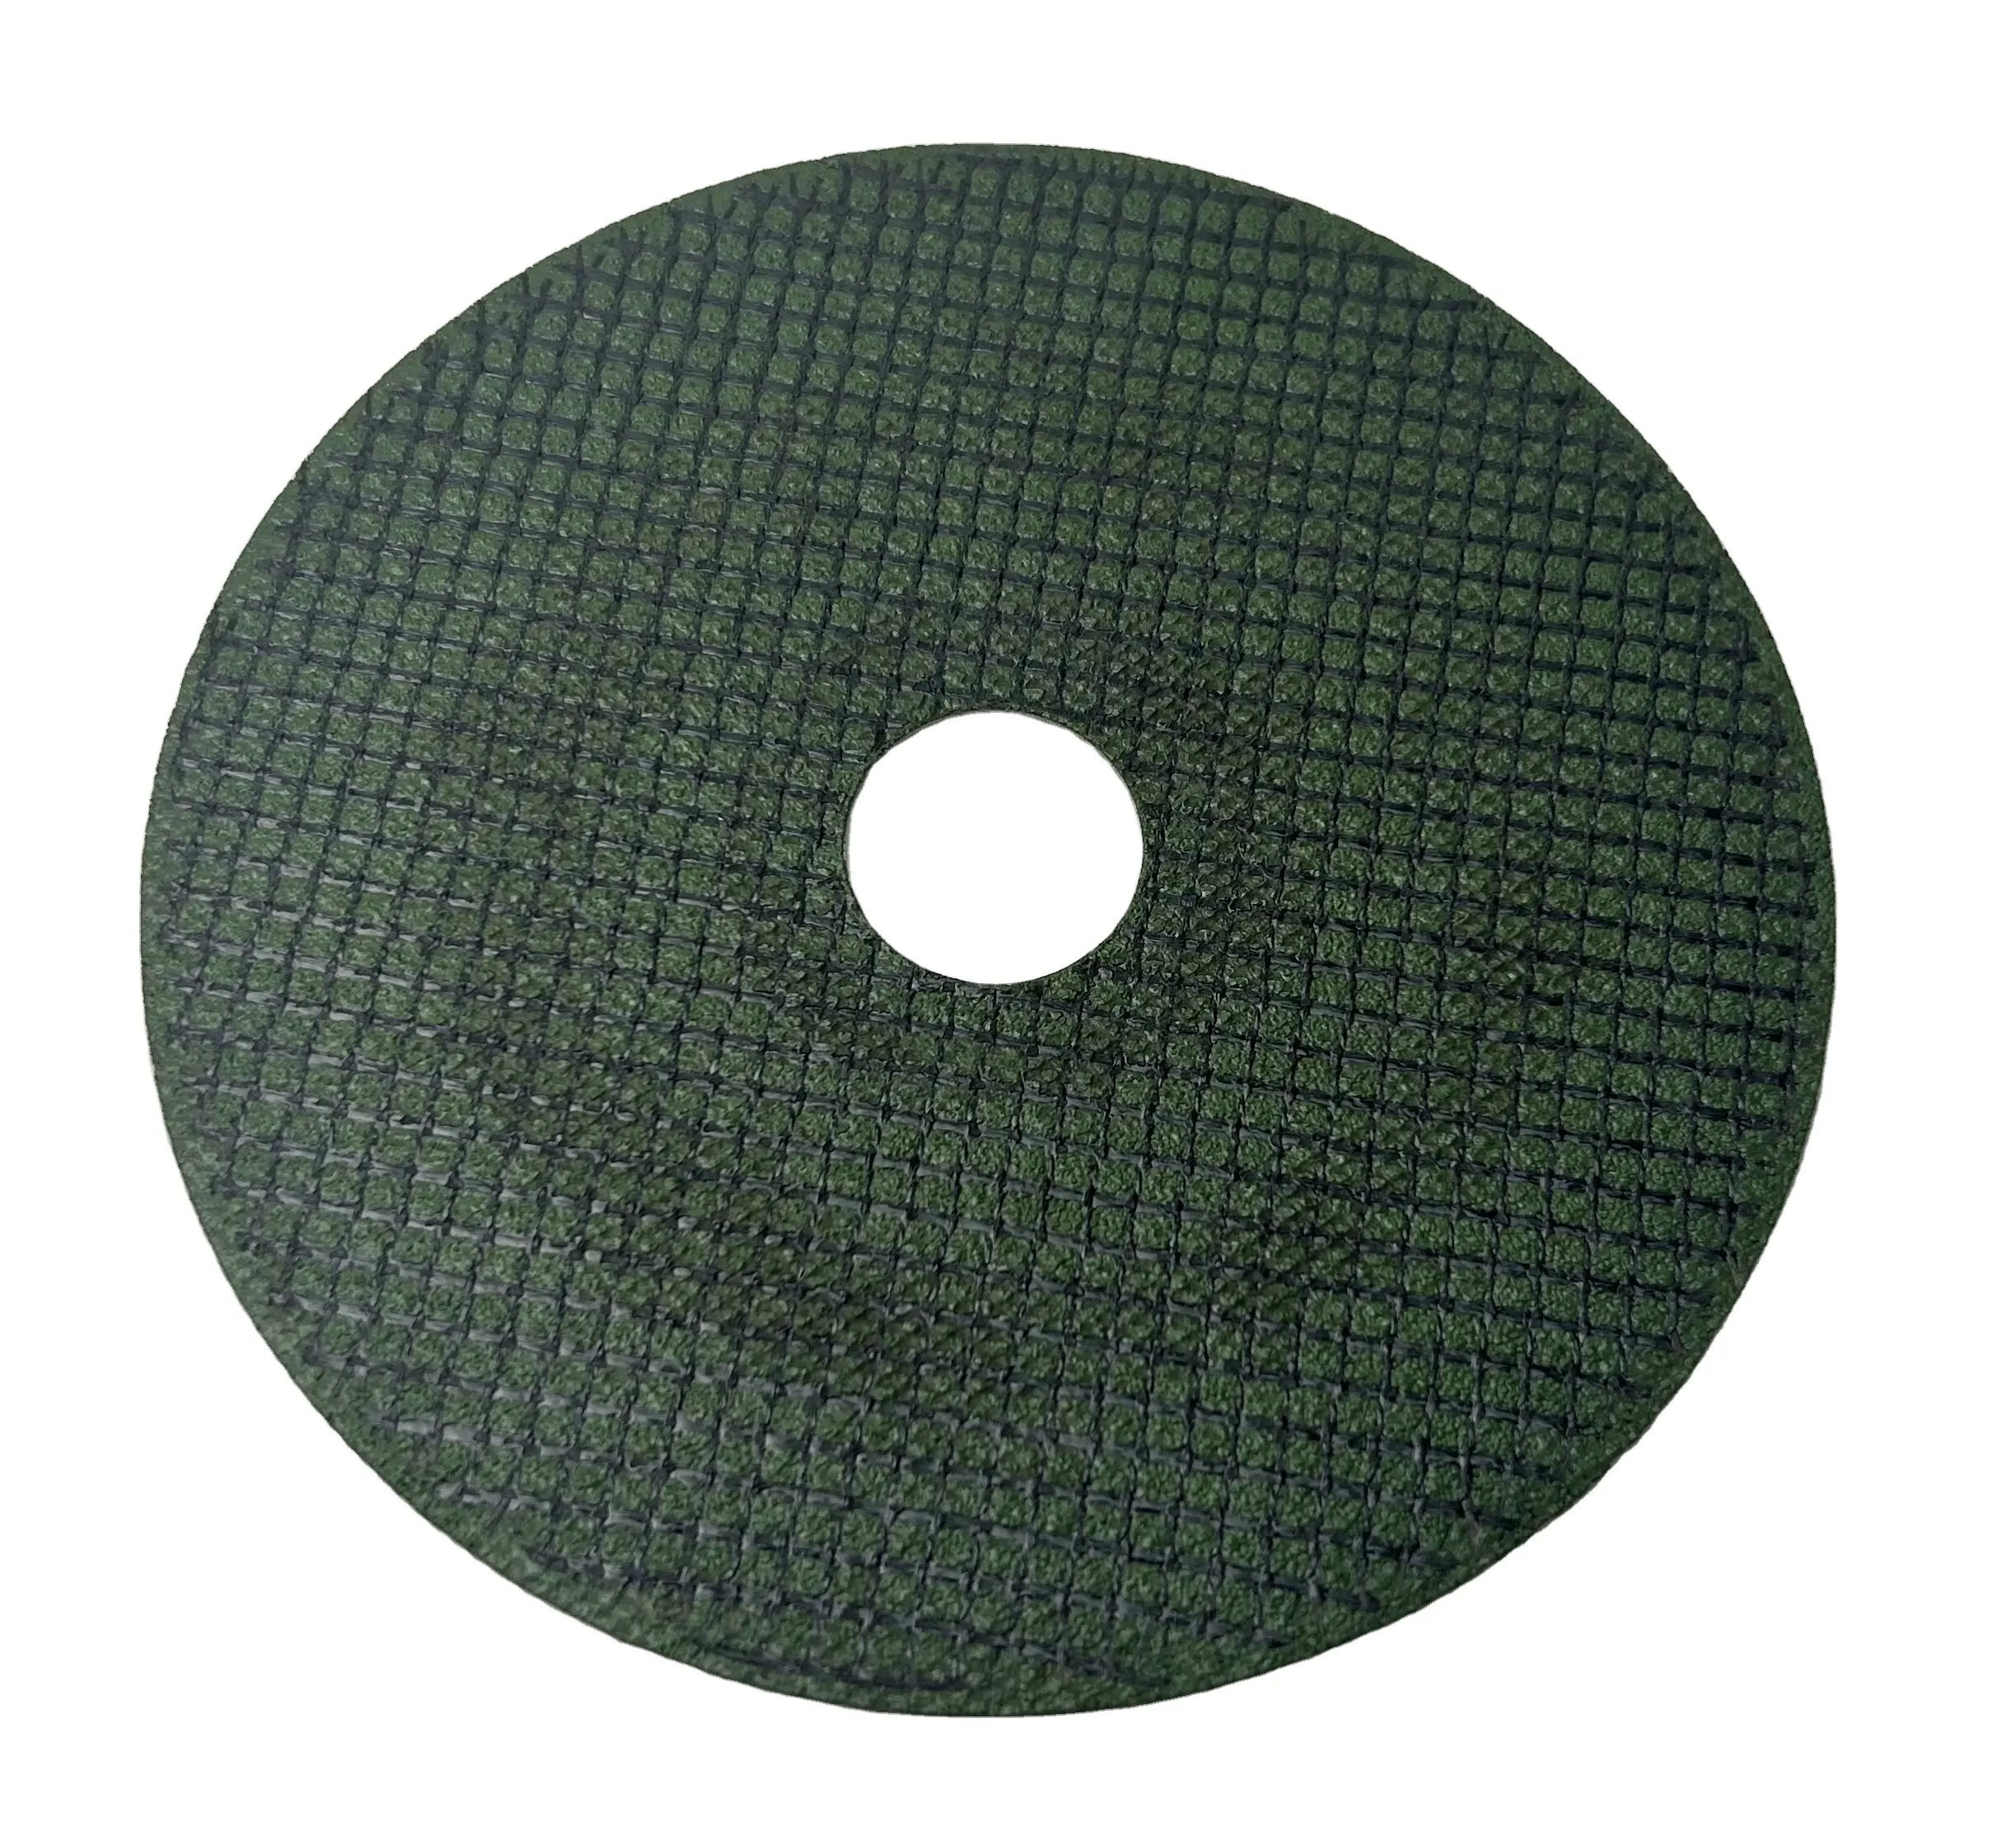 125mm*1.2mm China manufacture supply green double net abrasive tool stainless steel round cutting disc 22.5mm hole